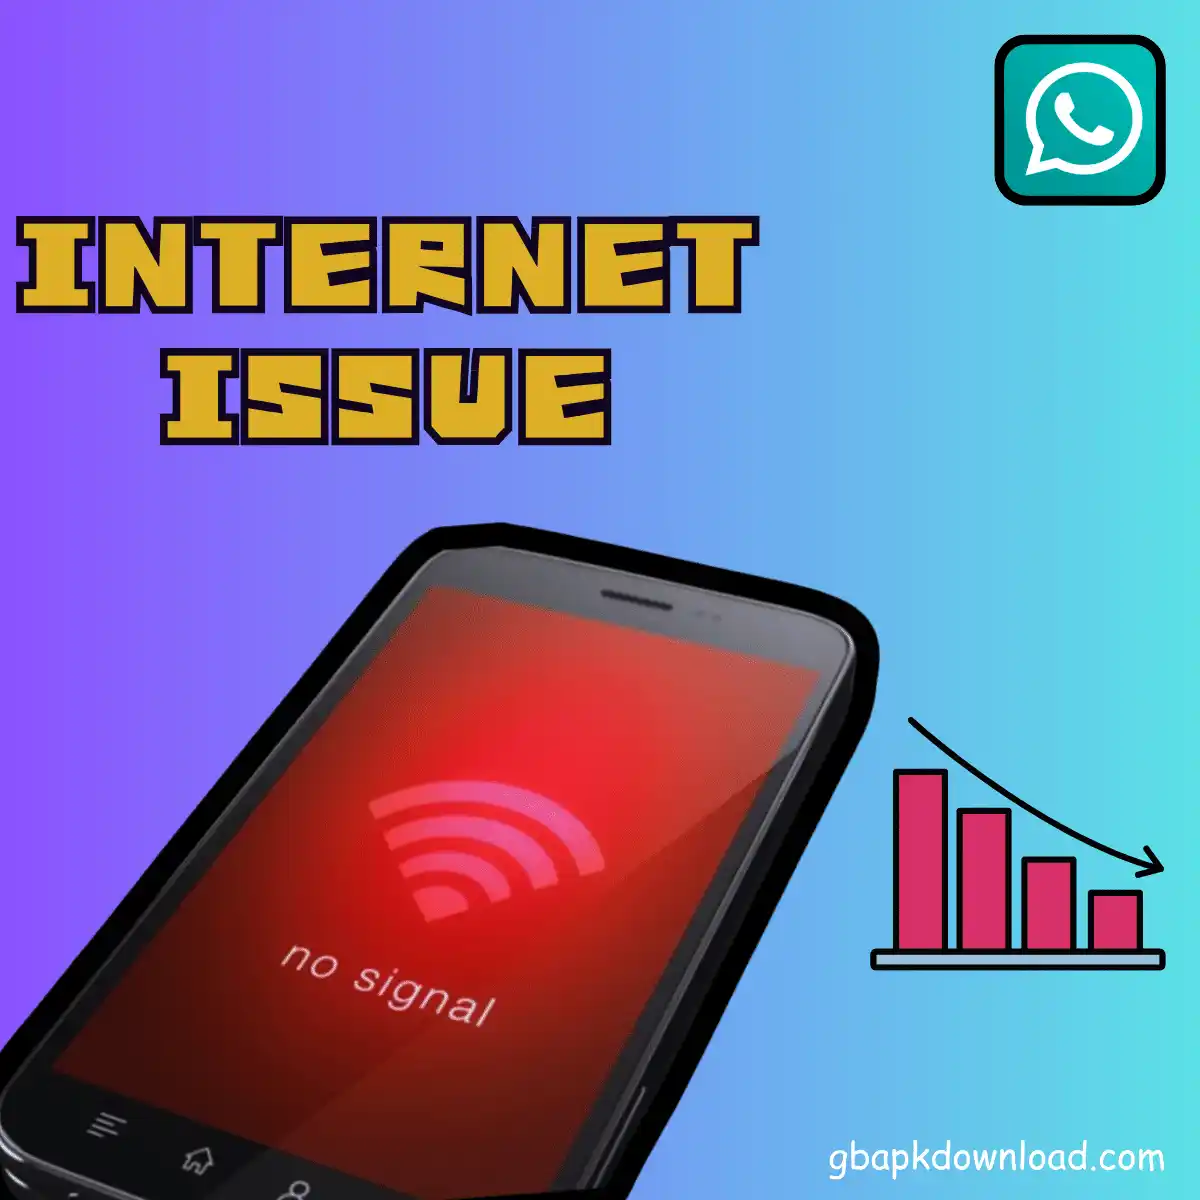 GB WhatsApp not installing due to an Internet issue